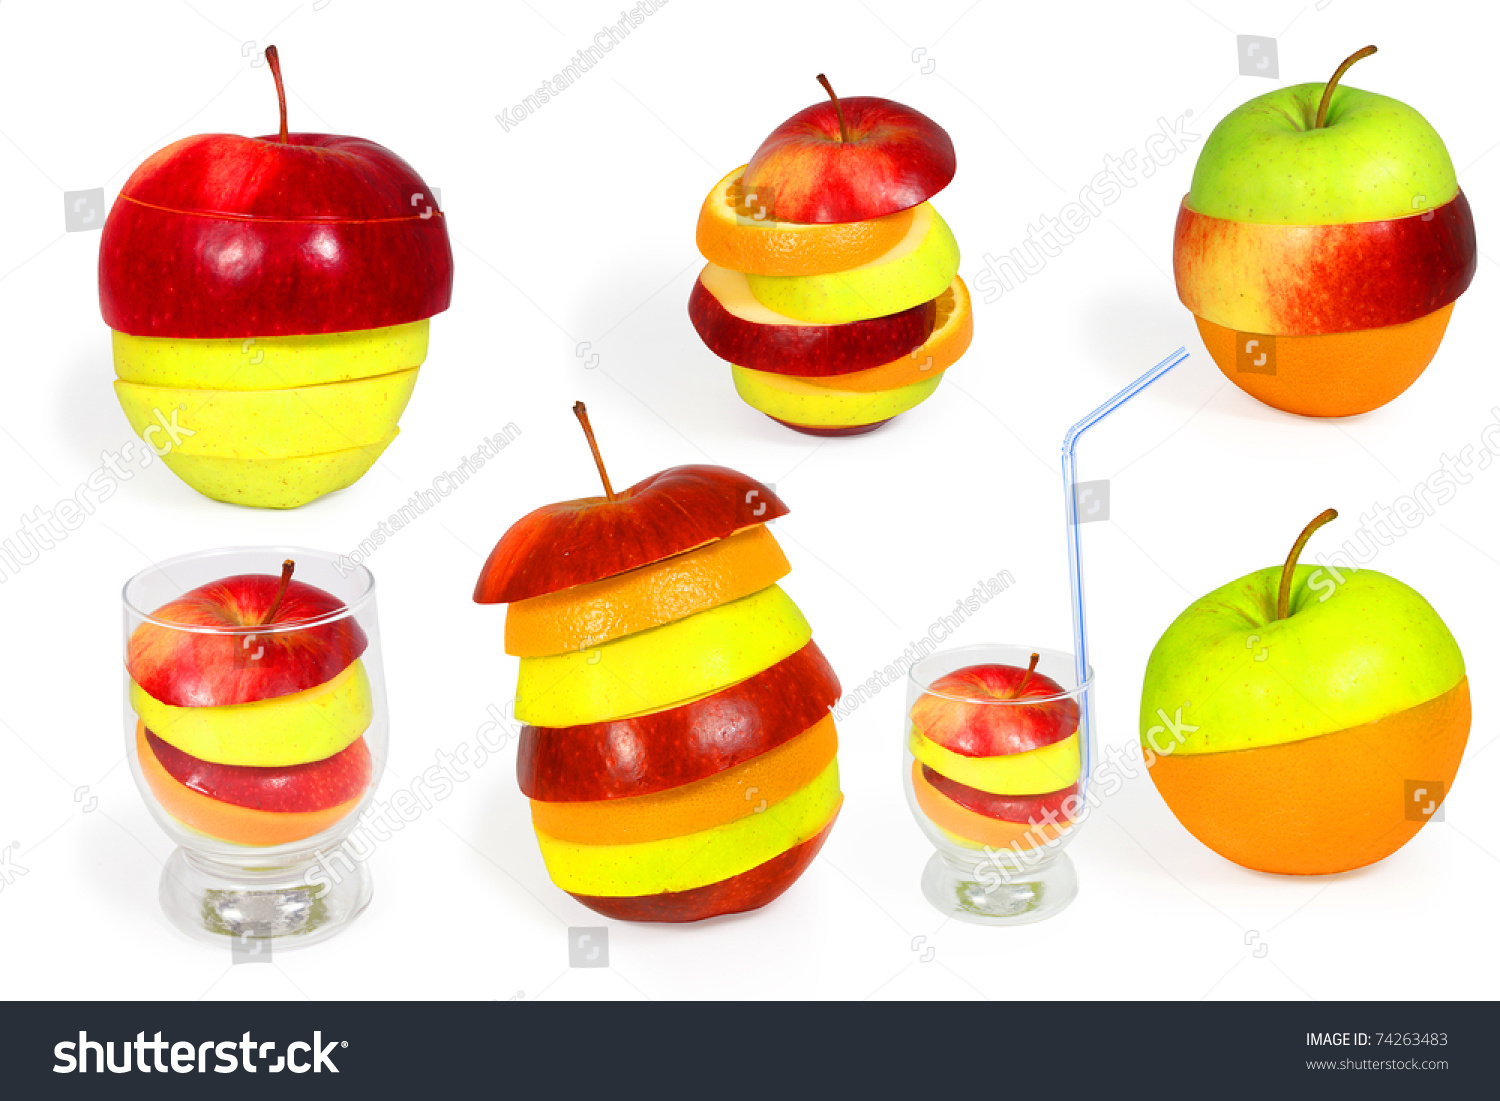 Collection Of Mixed Fruit Stock Photo 74263483 : Shutterstock